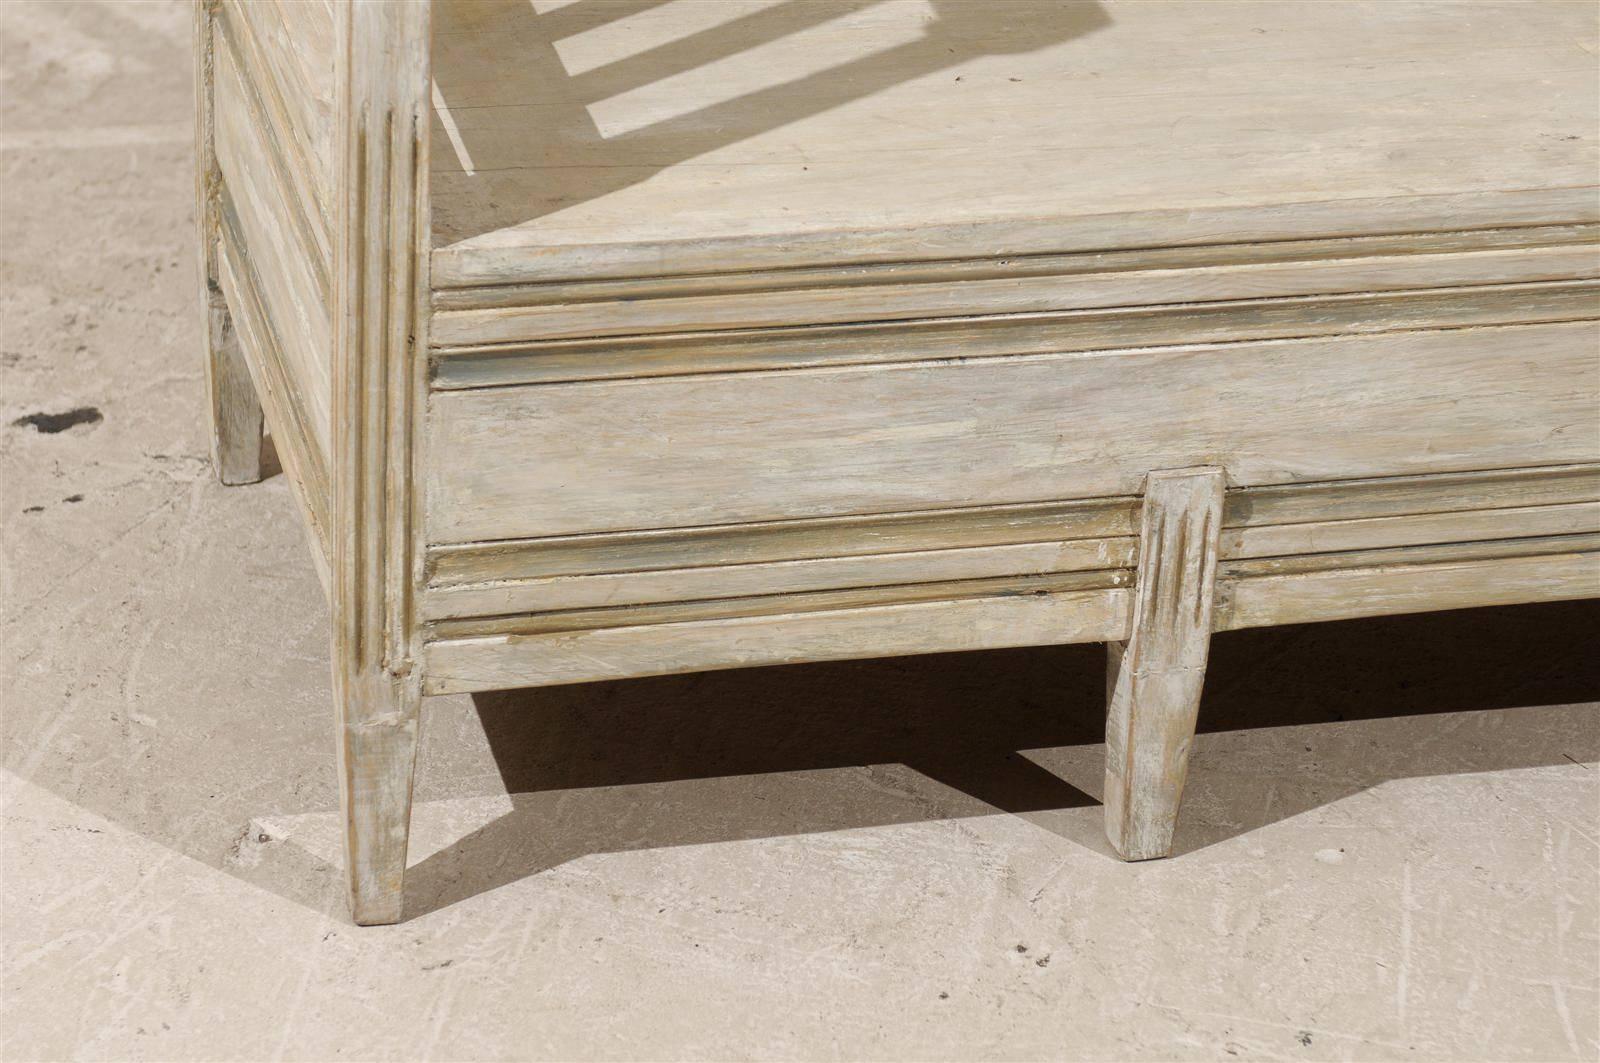 Wood A Swedish Late Gustavian Period Sofa Bench from the 19th Century with Back Slats